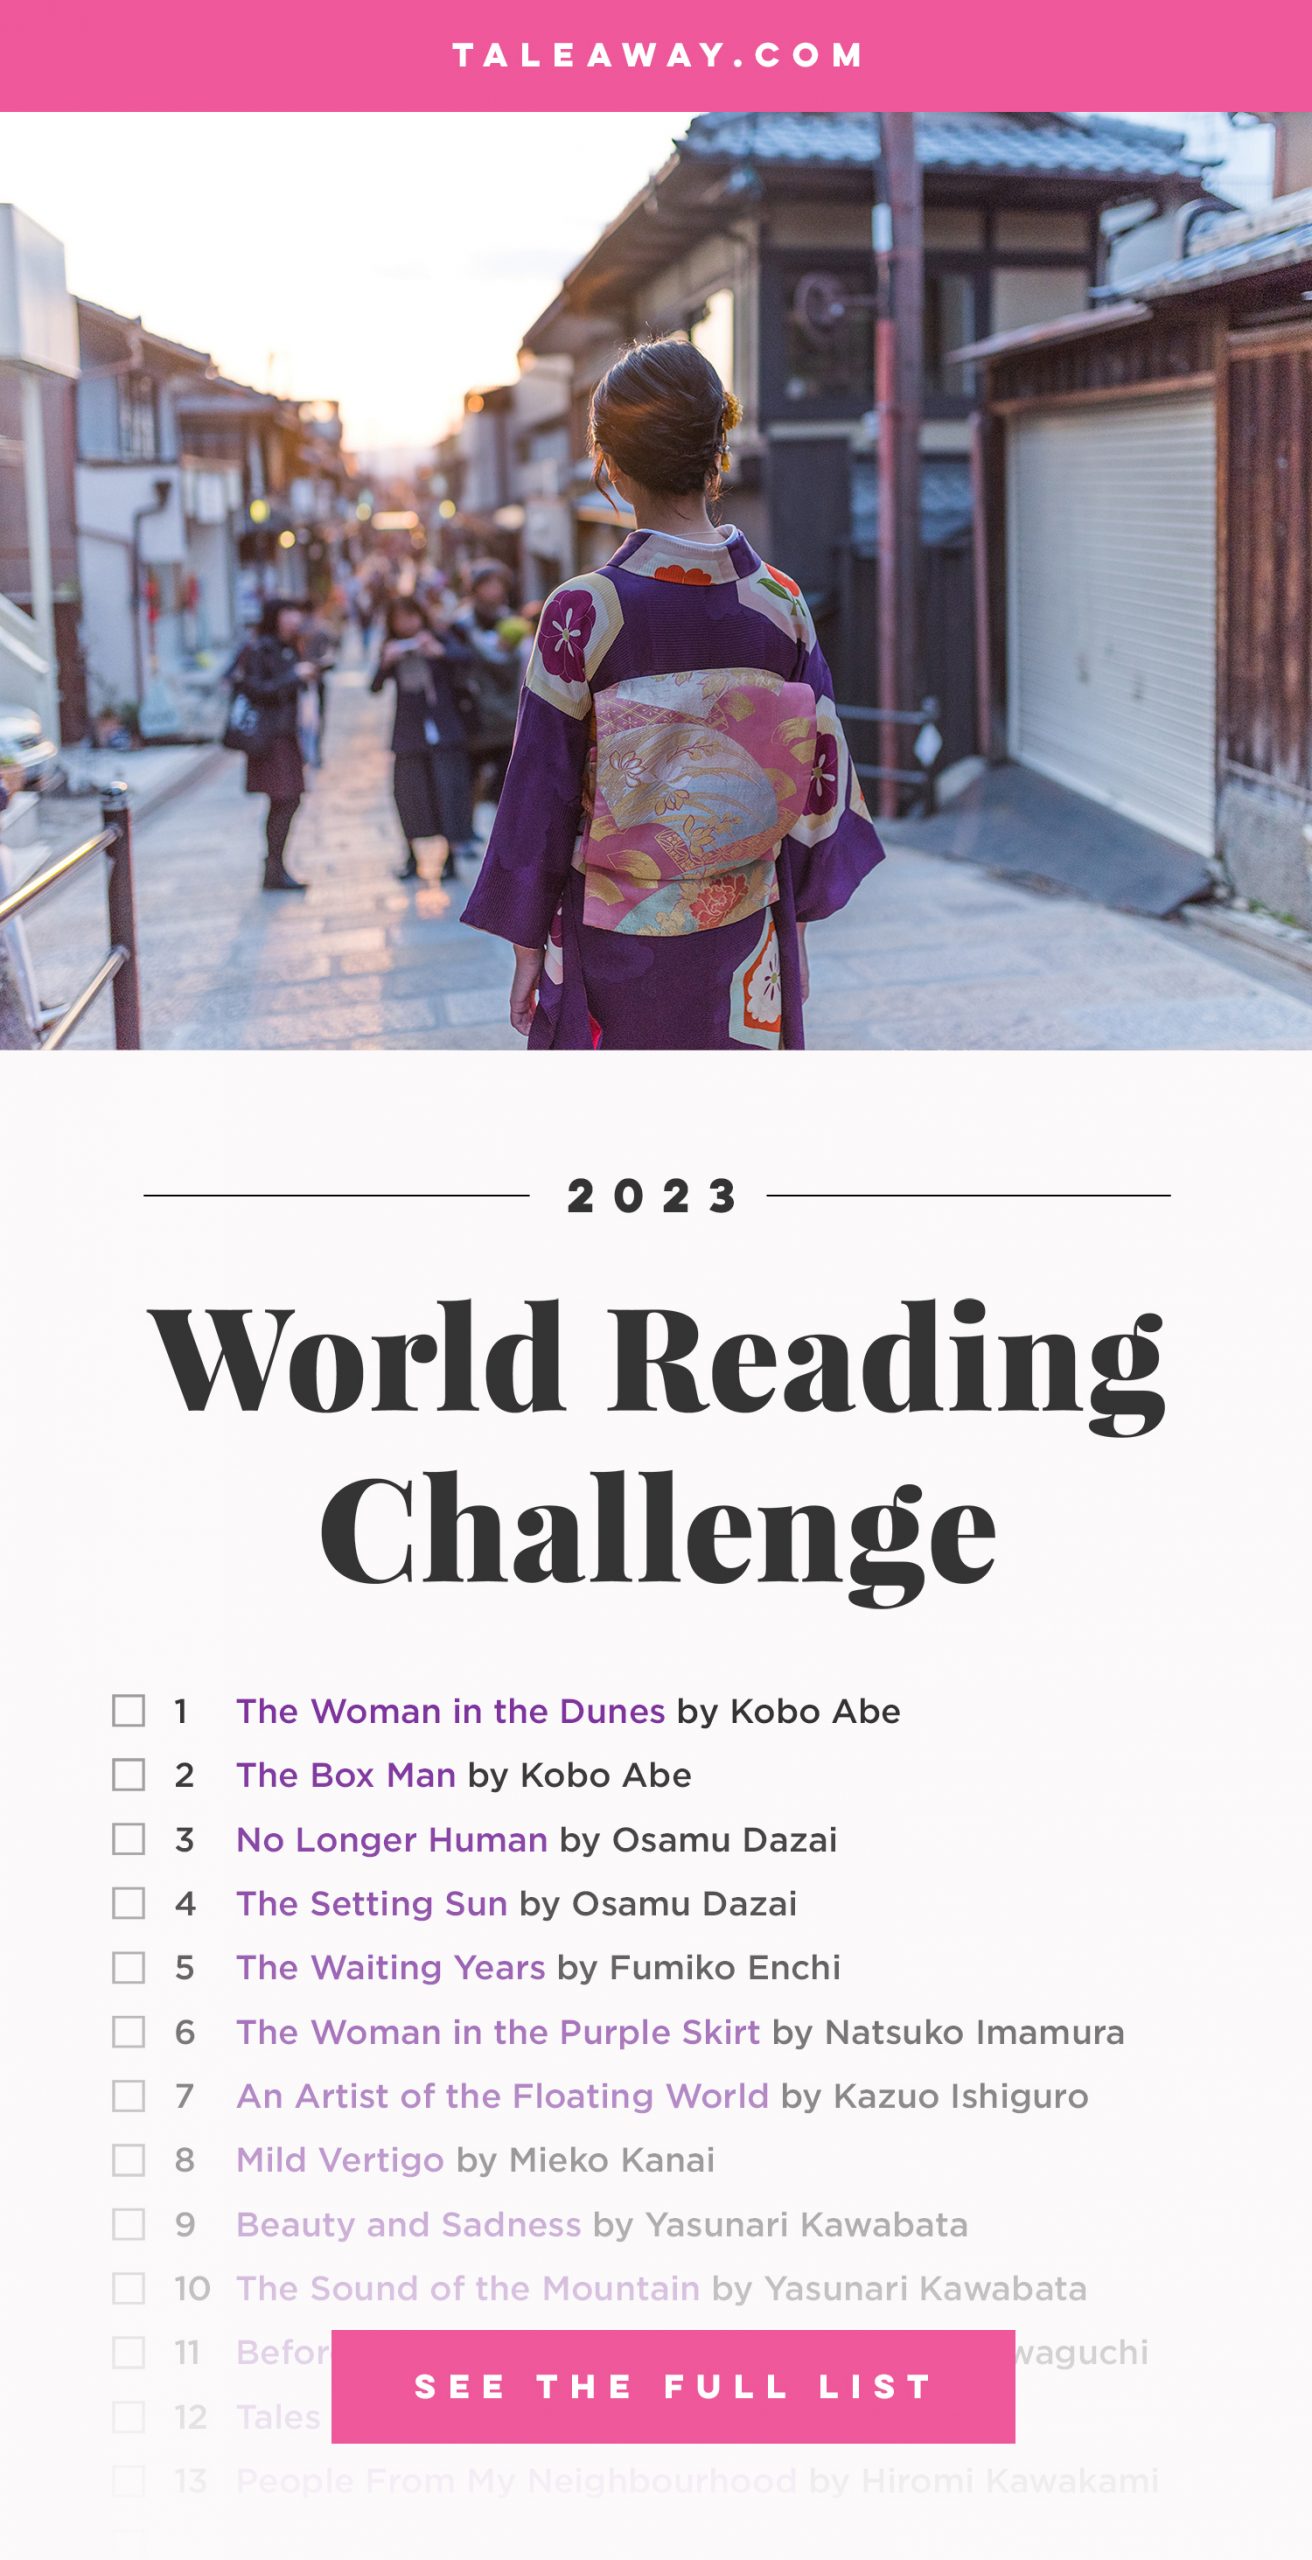 Books Set Around The World - world reading challenge, reading challenge 2023, world books 2023, world reading challenge 2023, reading japan, books set in japan, japanese books, books in translation, read the world, read around the world 2023, books around the world, novels set around the world, world novels, japan reading list, books to read, books set in different countries, best japanese novels, books set in tokyo, japanese fiction